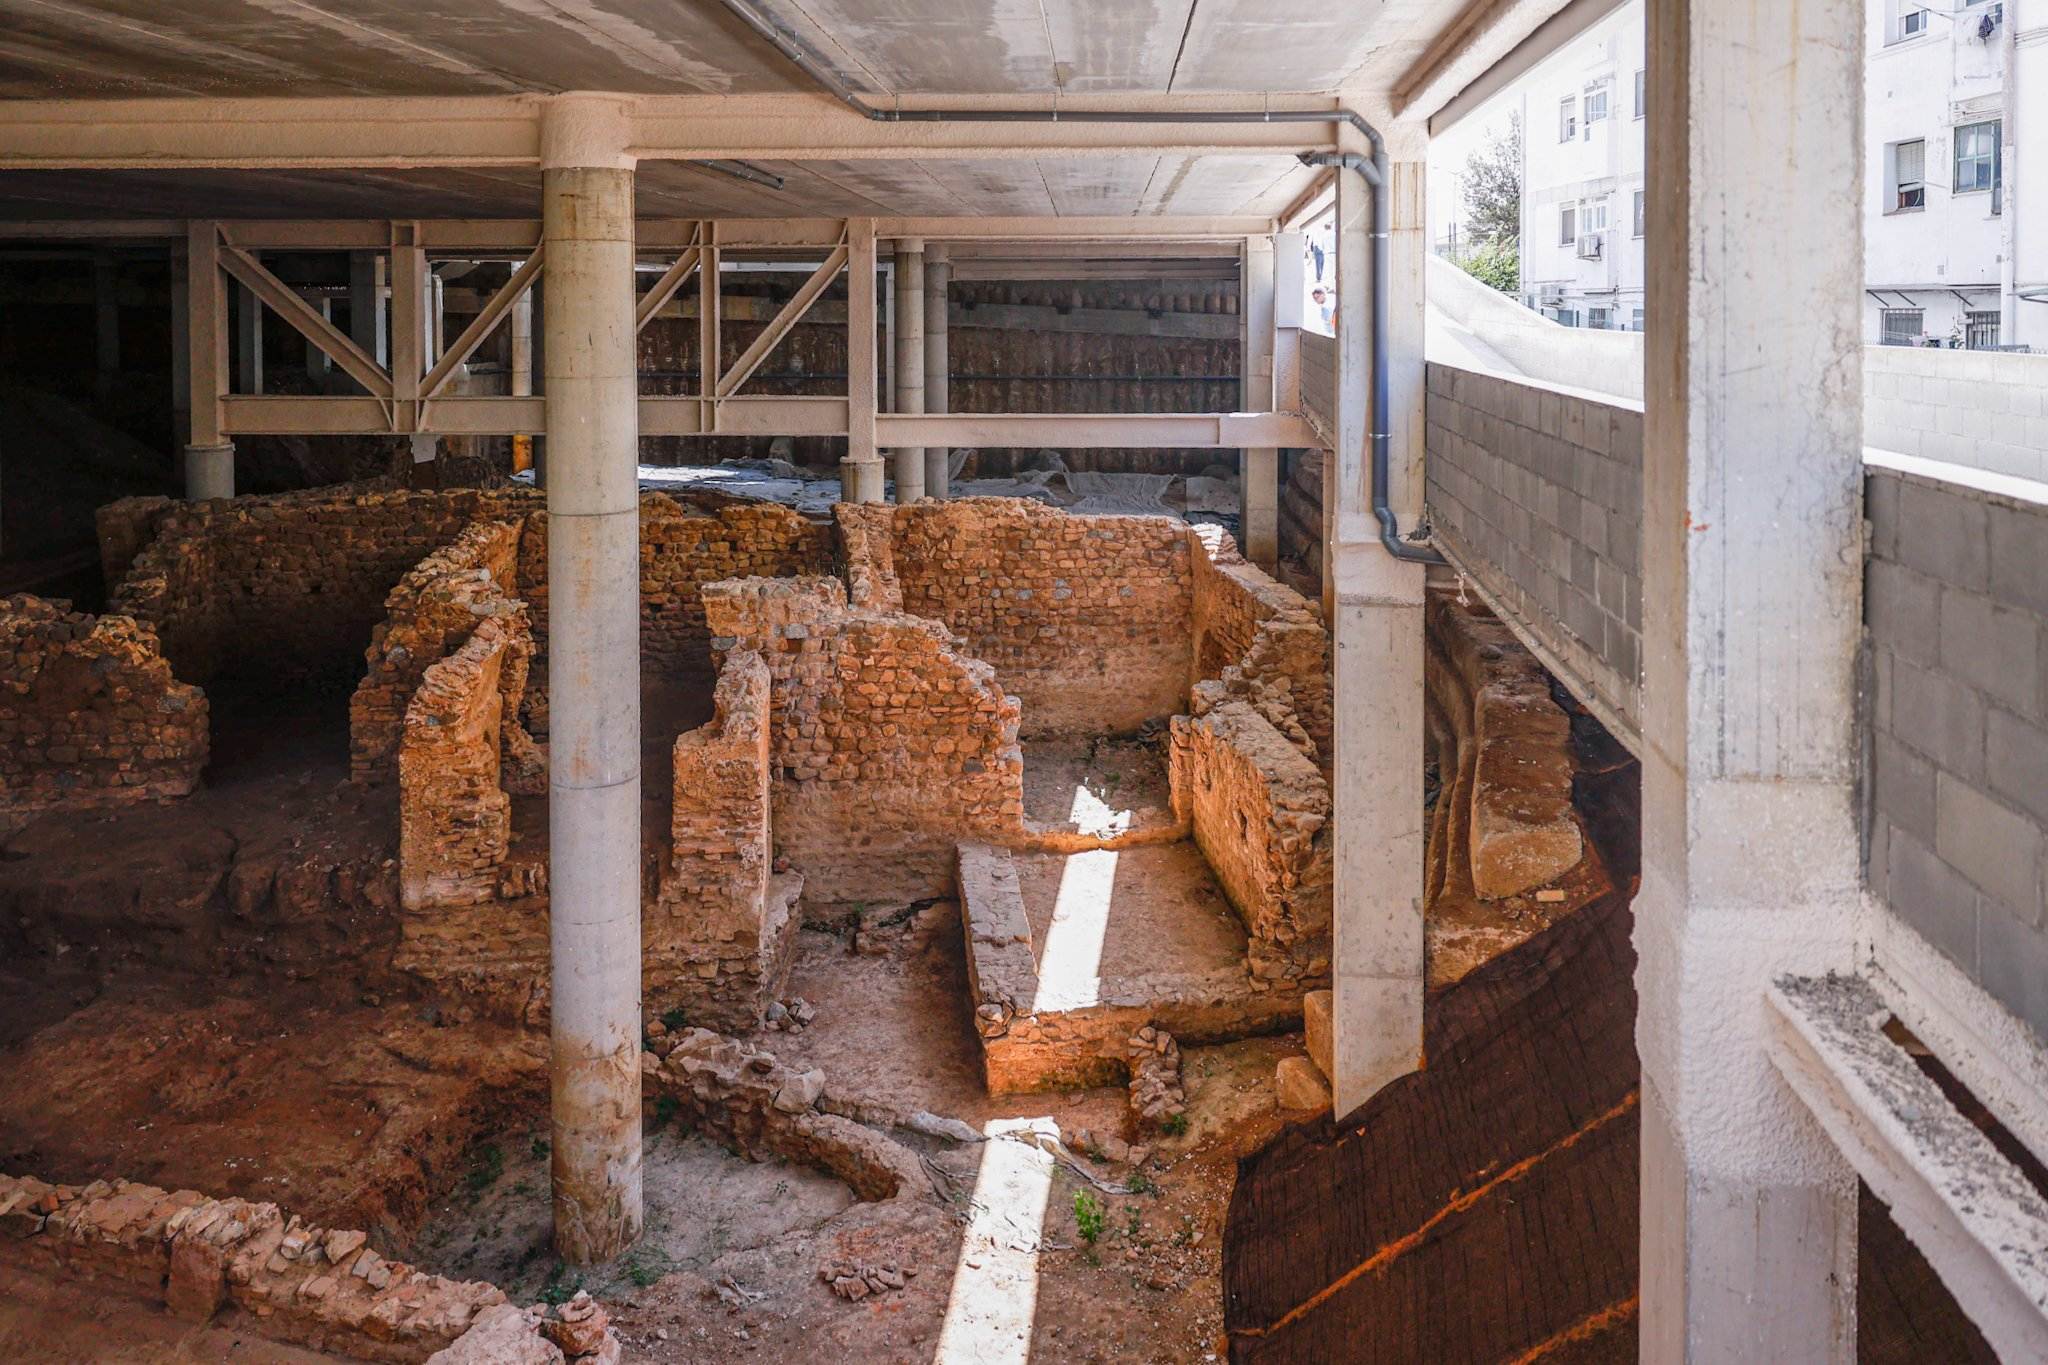 Supermarket above and Roman ruins below: old and new "coexist" in a Catalan seaside town